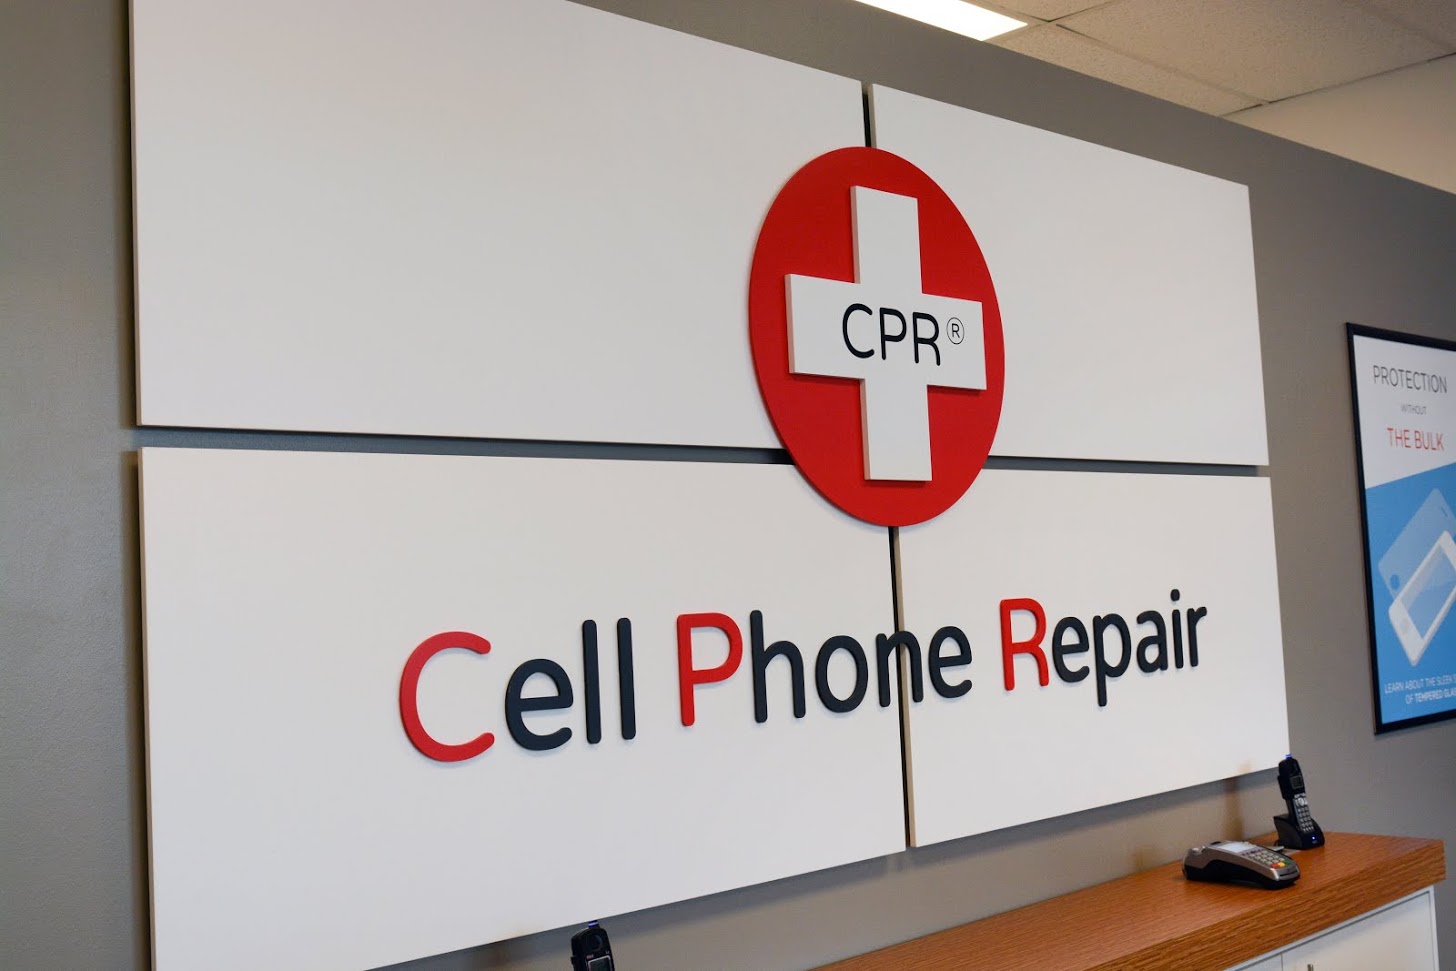 CPR Cell Phone Repair, Monday, May 6, 2019, Press release picture